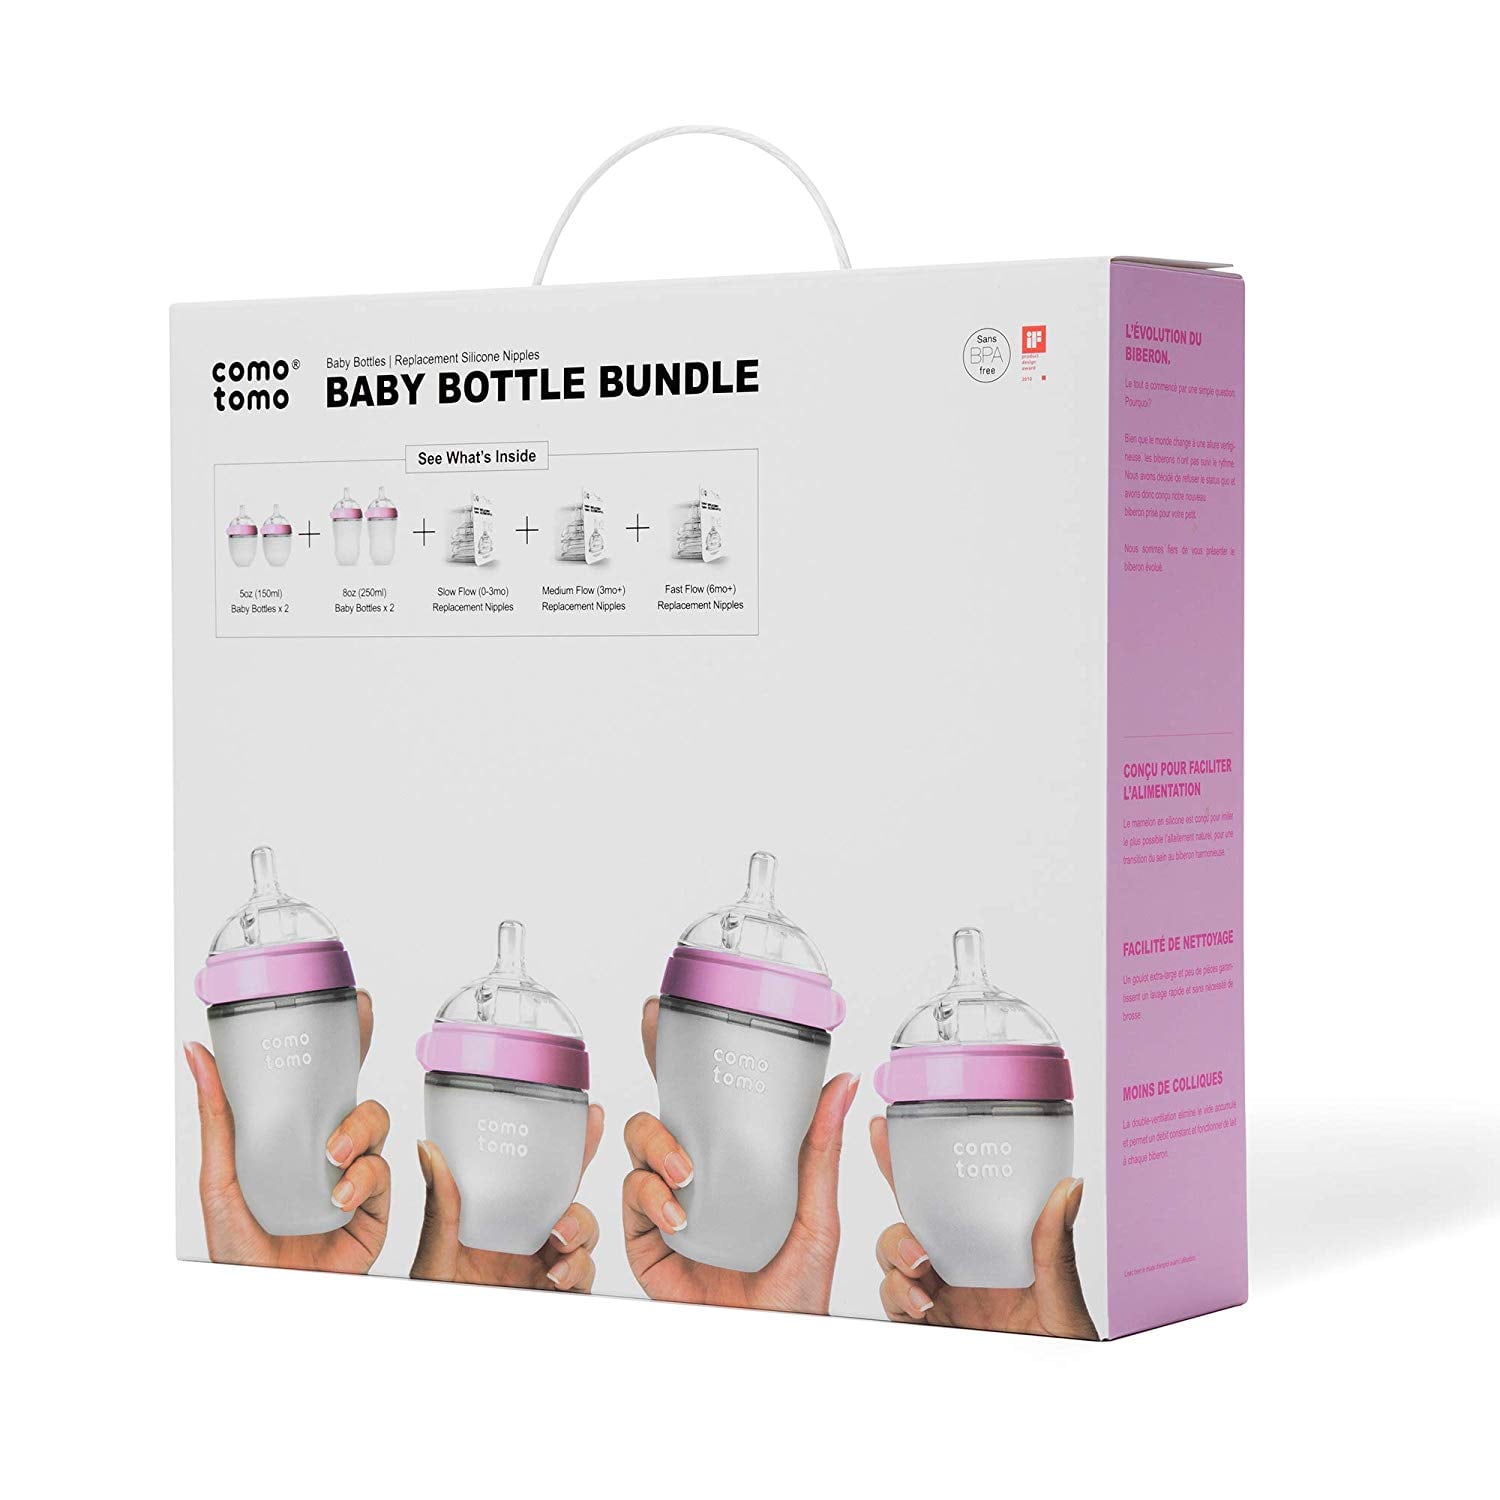 top rated baby bottles